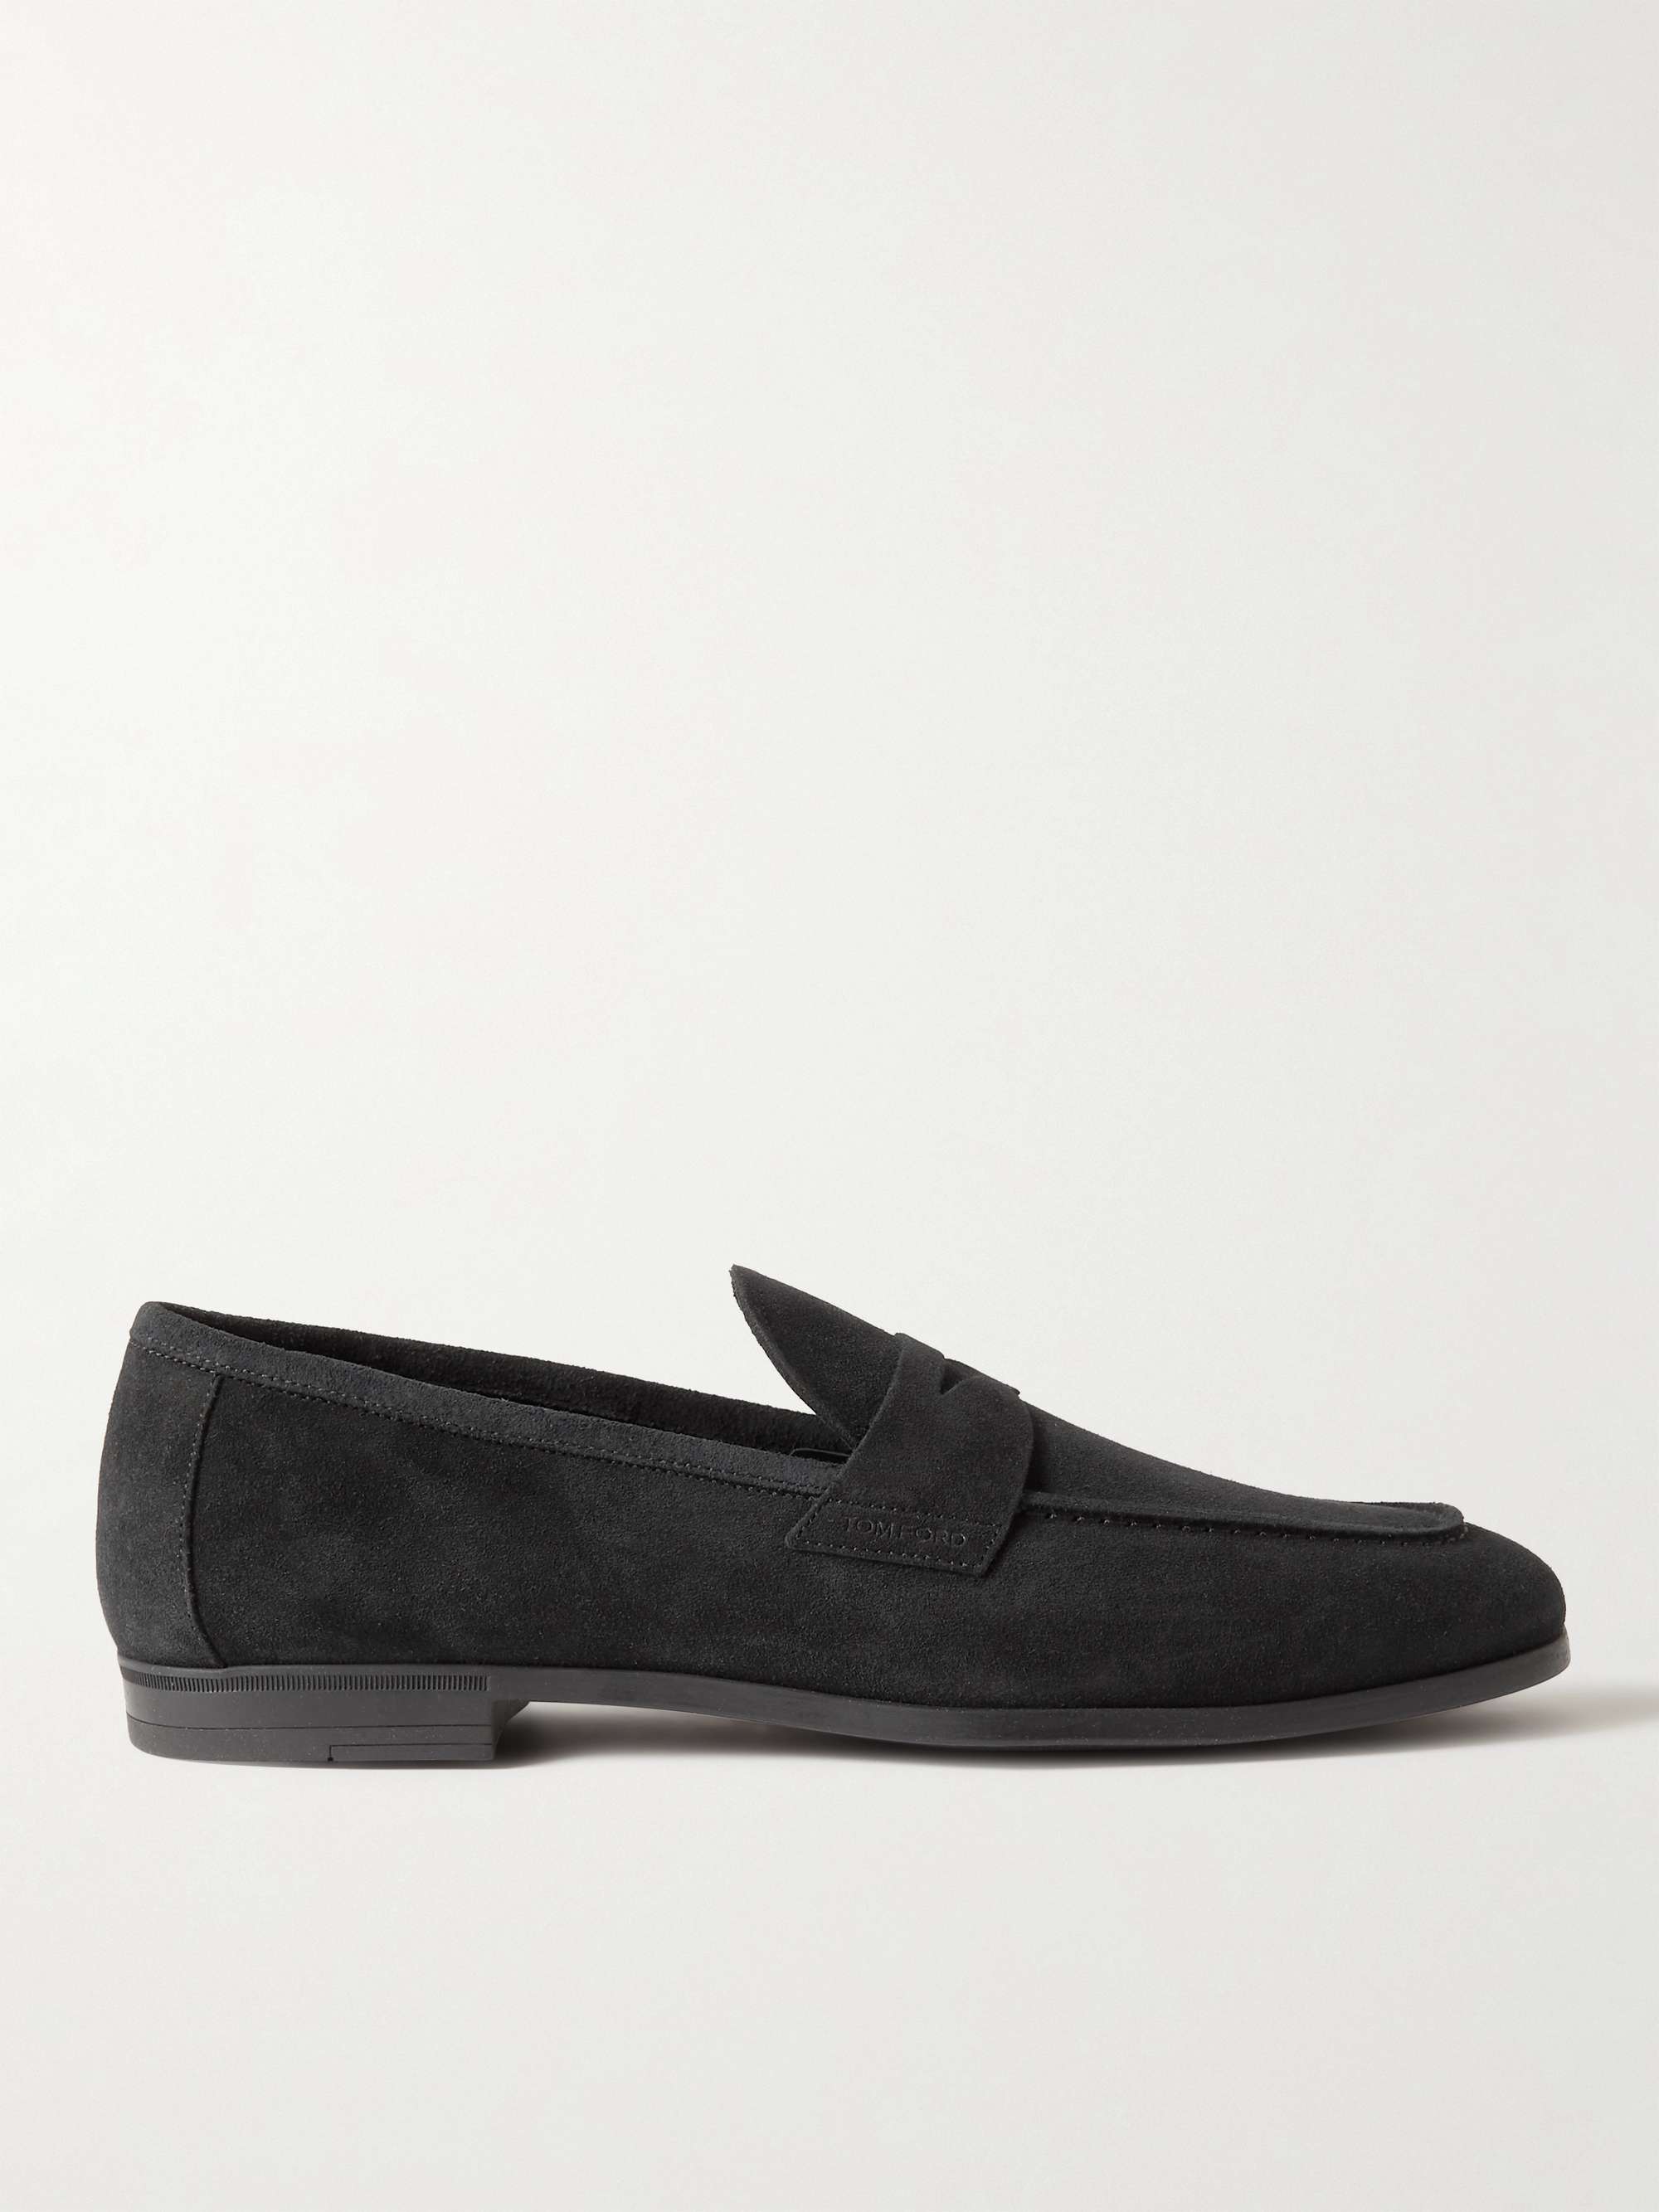 TOM FORD Sean Suede Penny Loafers